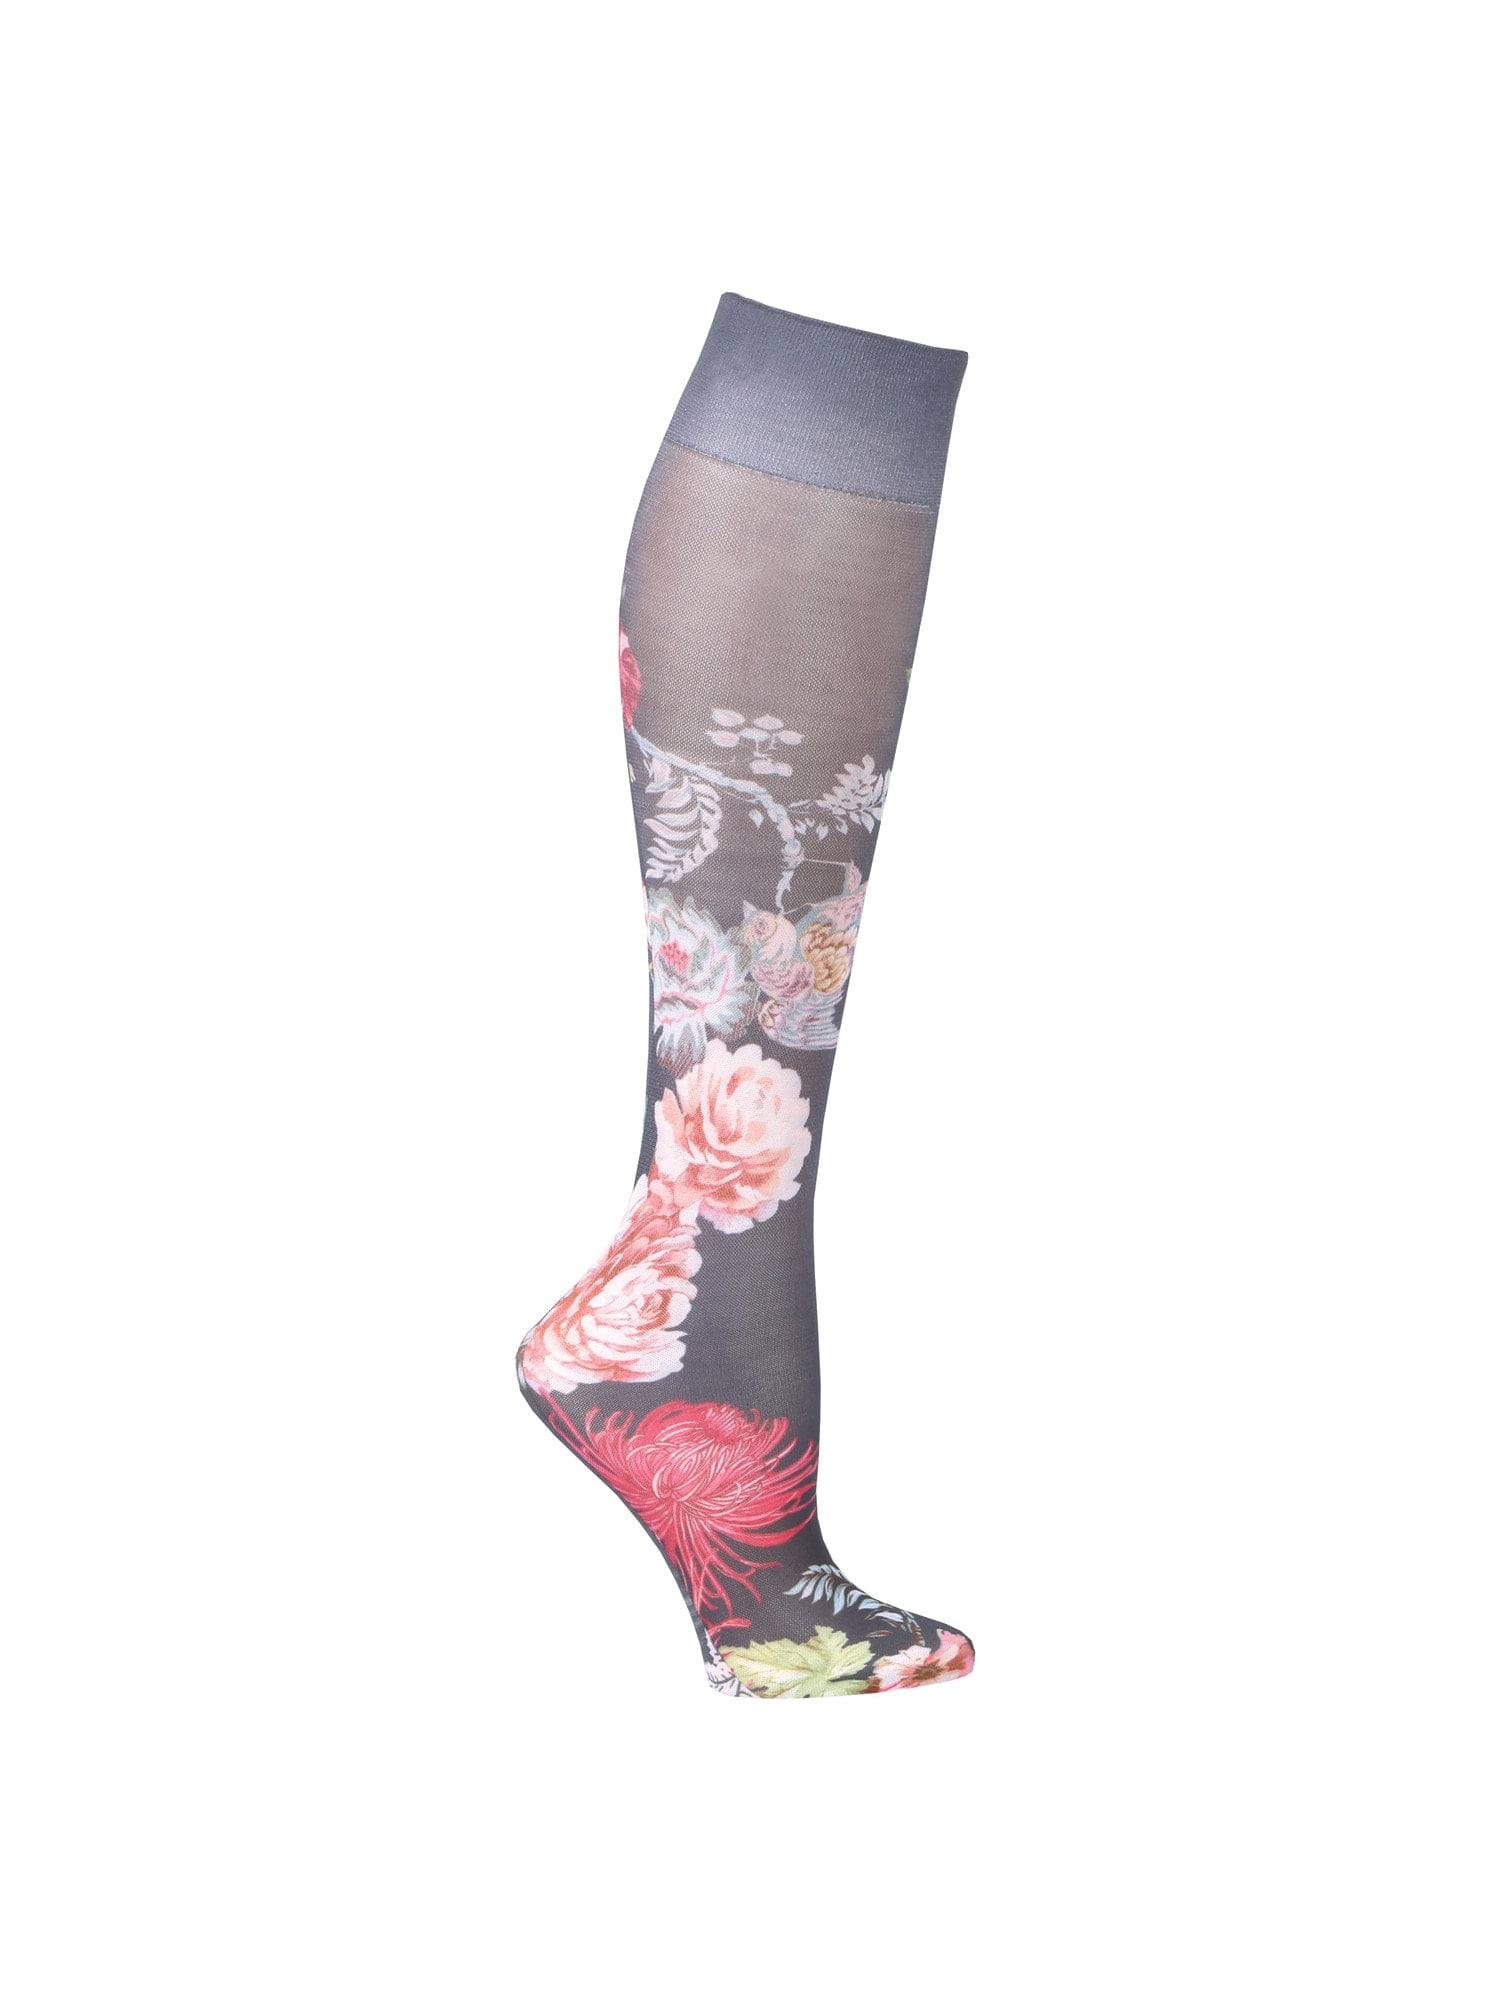 Celeste Stein Moderate Compression Knee High Stockings Wide Calf 